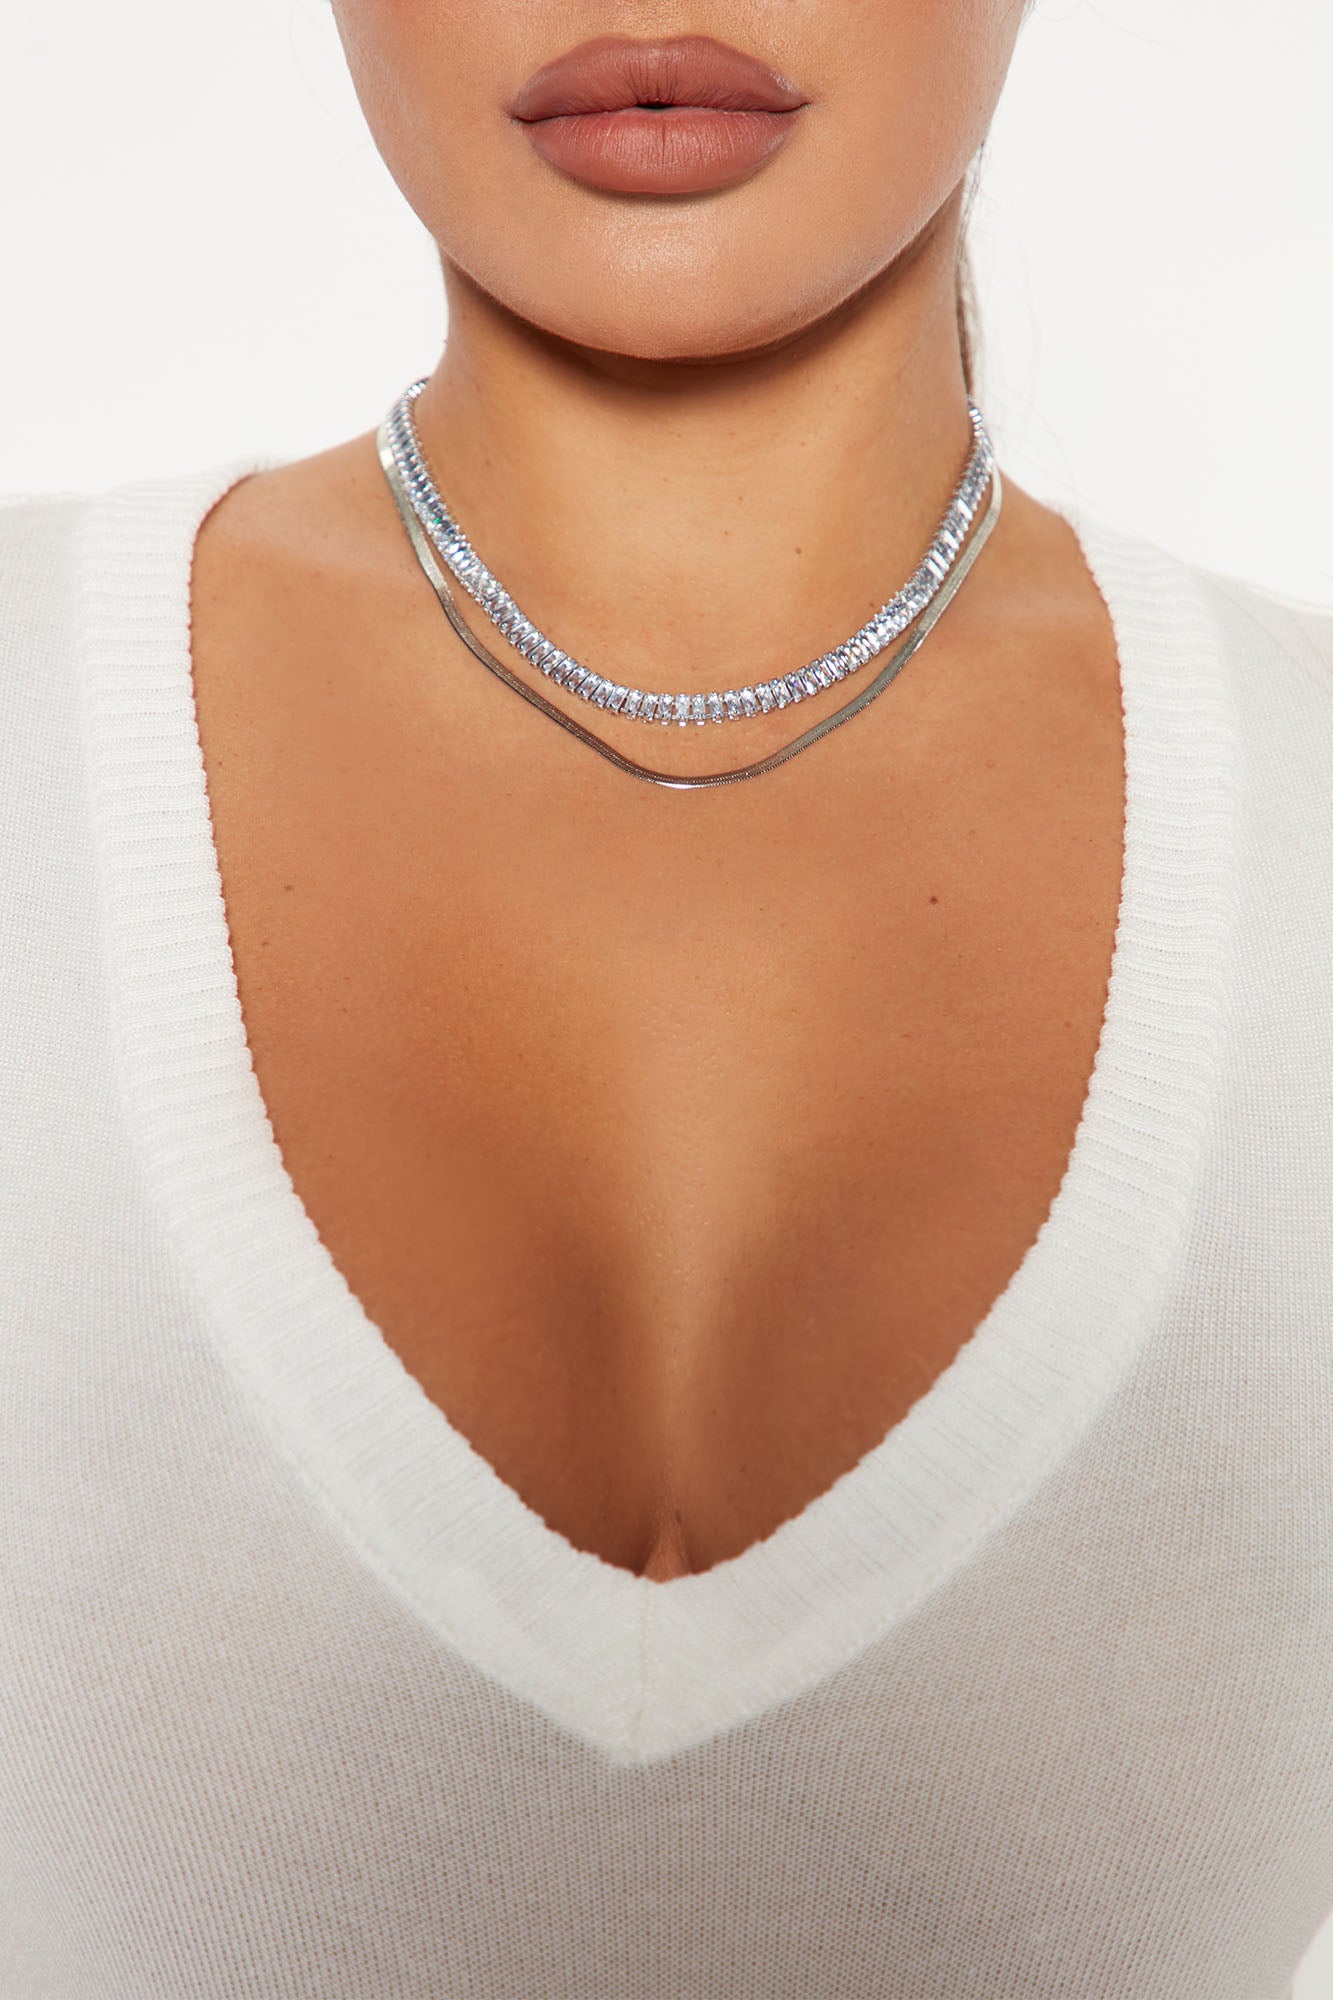 Casual But Glam Necklace - Silver